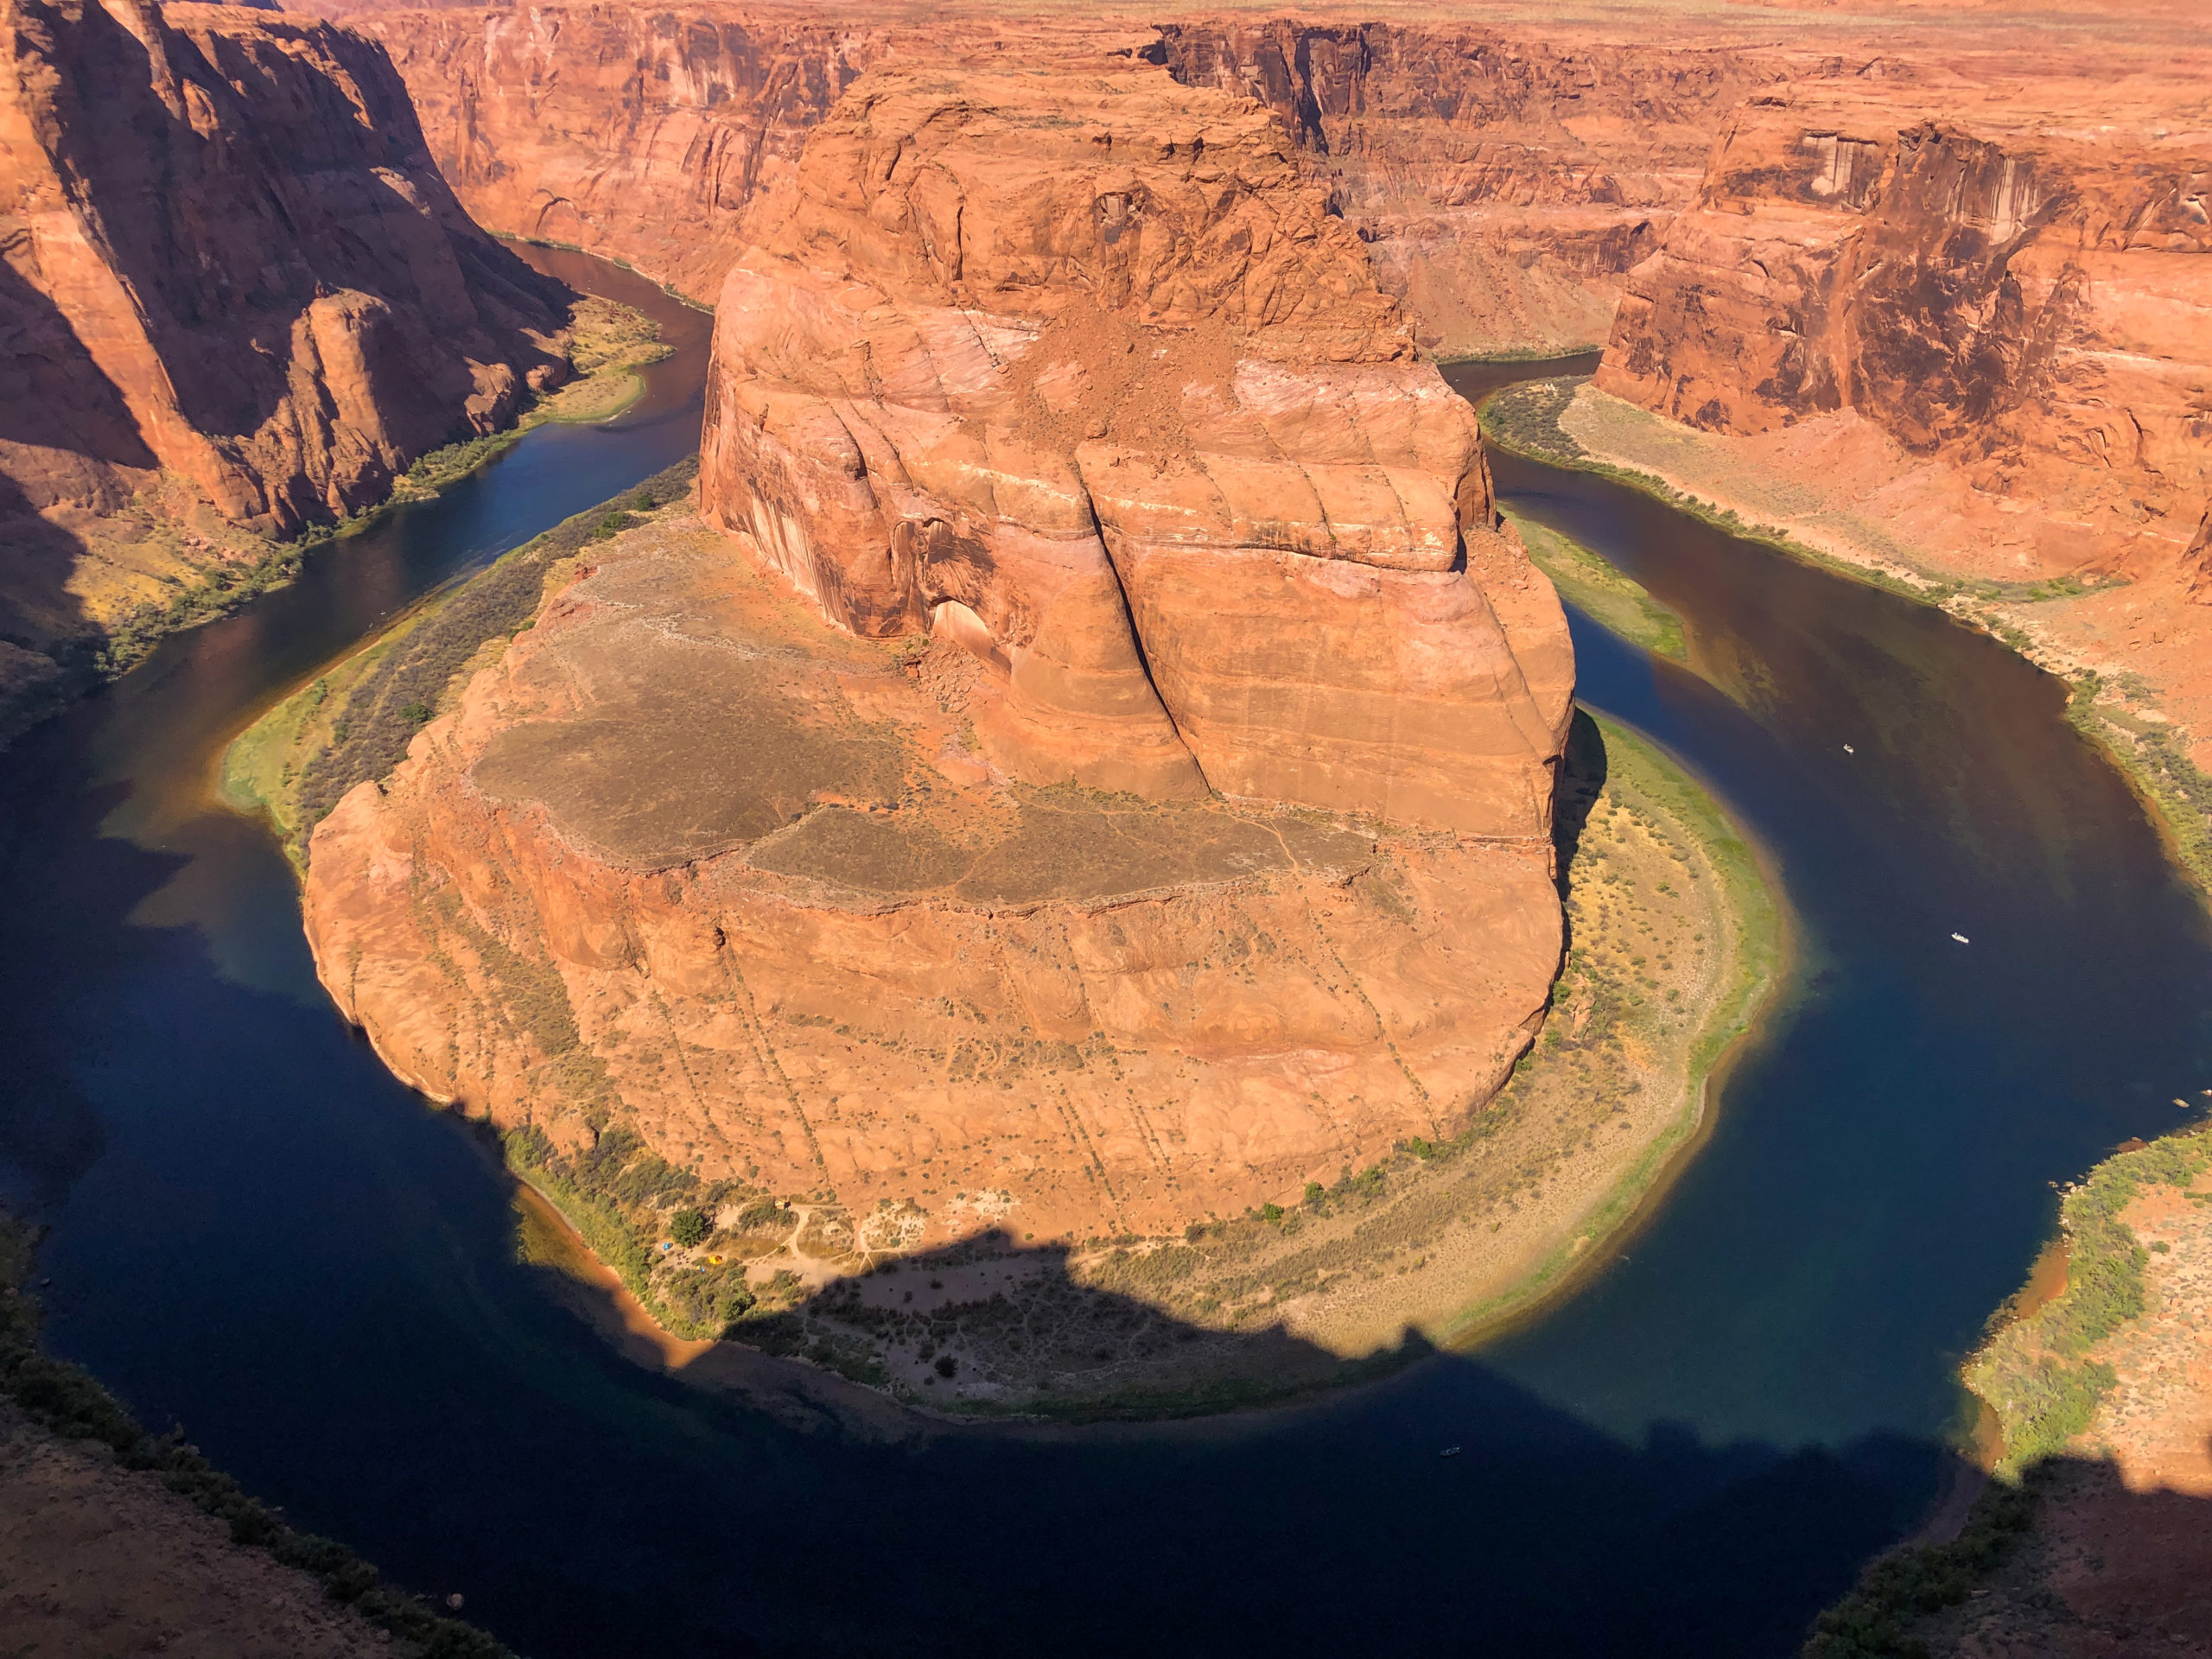 The Colorado River at Horseshoe Bend about 7 miles downstream of Lake Powell. The period between 2000 and 2019 marked the driest 20-year stretch in the Upper Colorado River Basin since Lake Powell opened. There were only four years in that timeframe during which there were above-average inflows into Lake Powell. Warming temperatures due to climate change have had a significant impact on reducing water flows on the Colorado River. Photo credit: Denver Water.